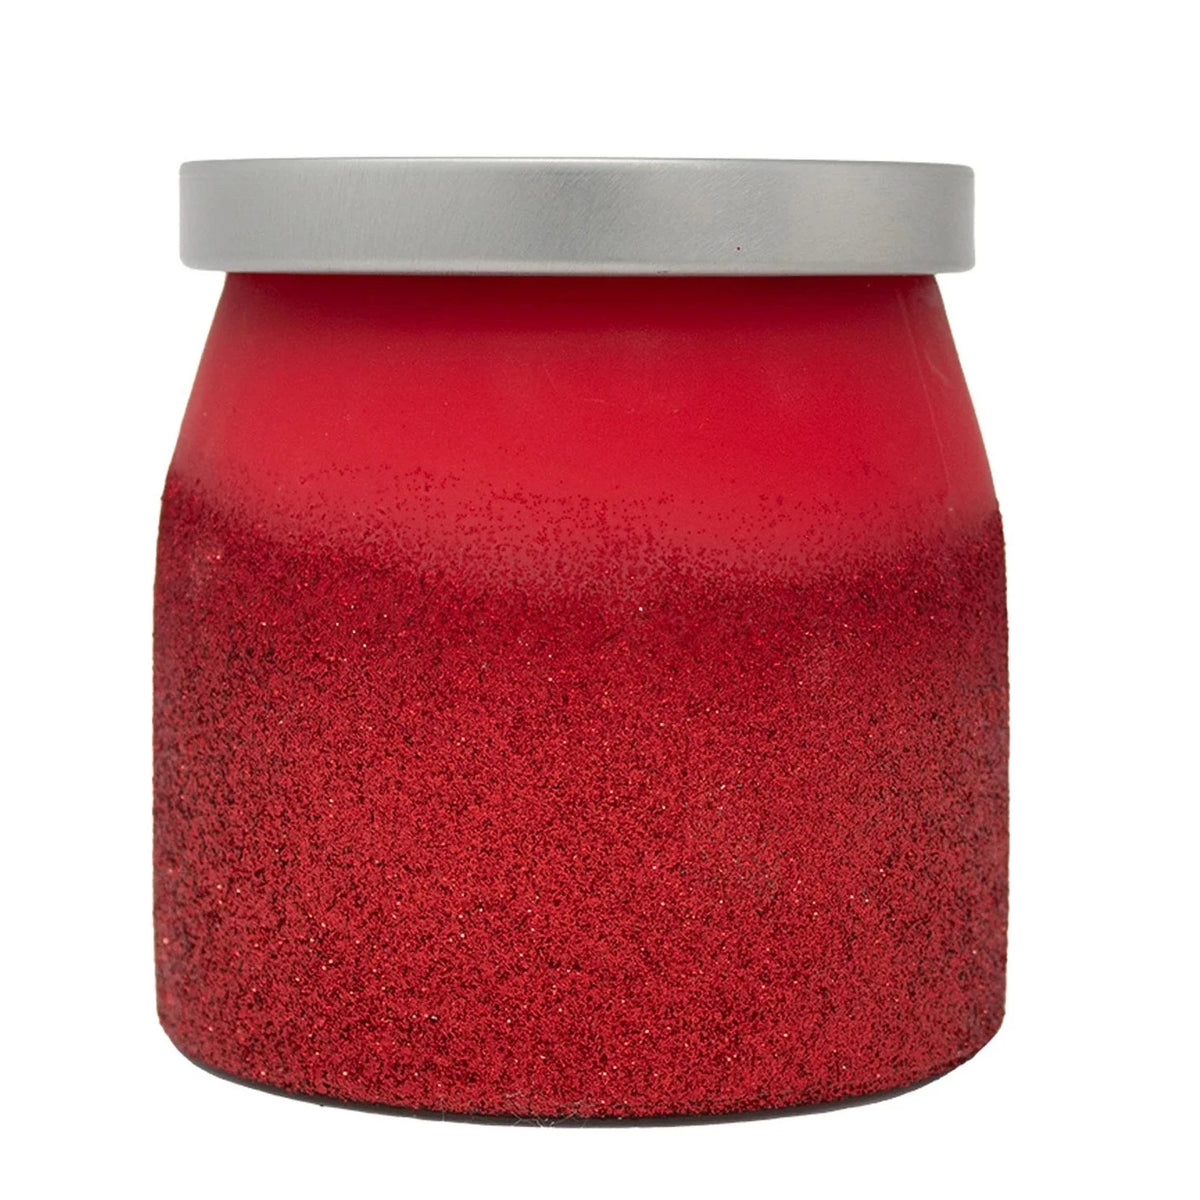 Merry Berry Spice 16oz Limited Edition Candle by Milkhouse Candle Co.